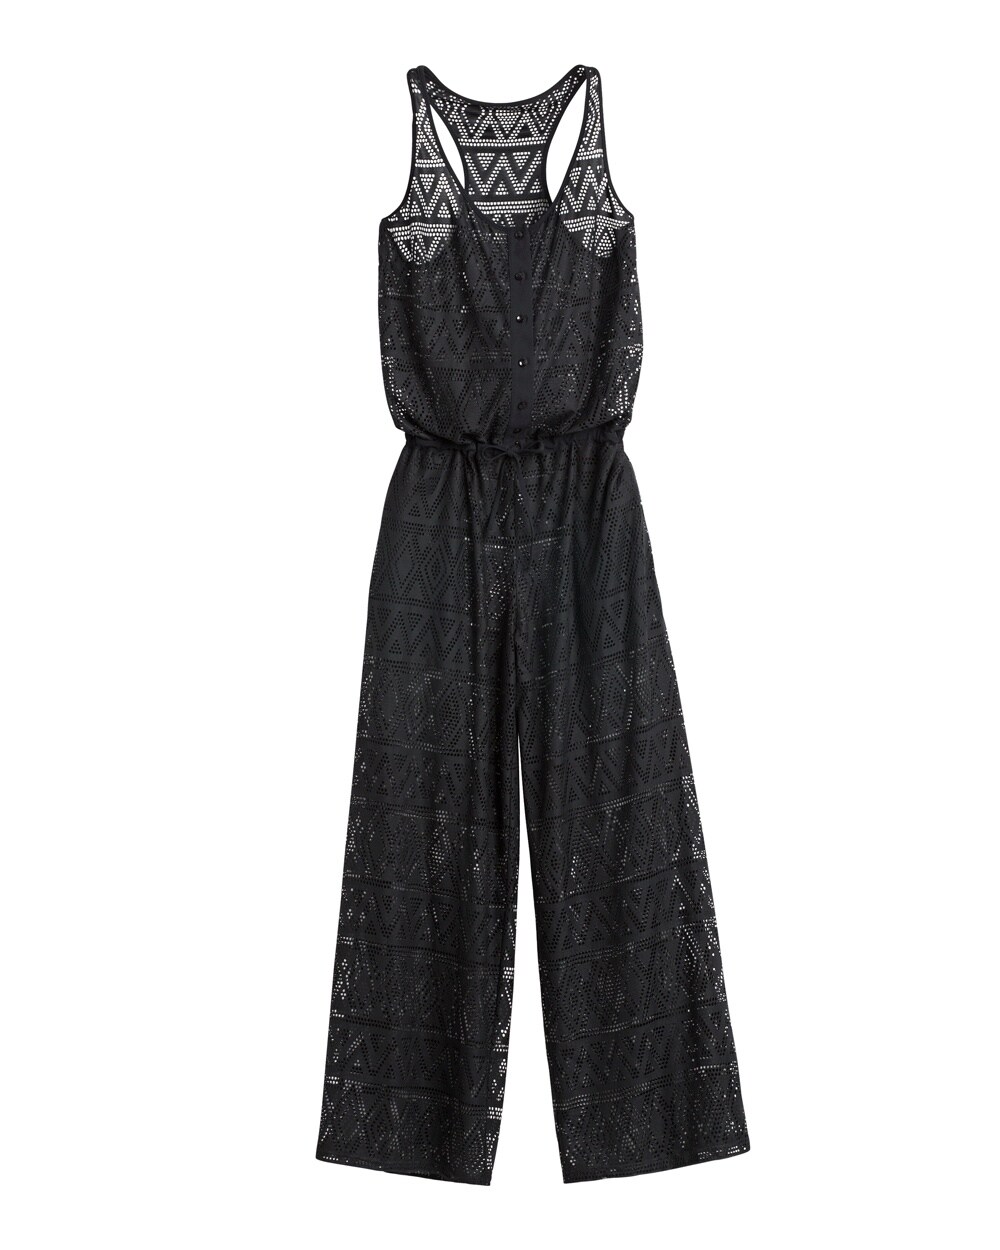 Crocheted Jumpsuit Swim Cover Up - Chico's